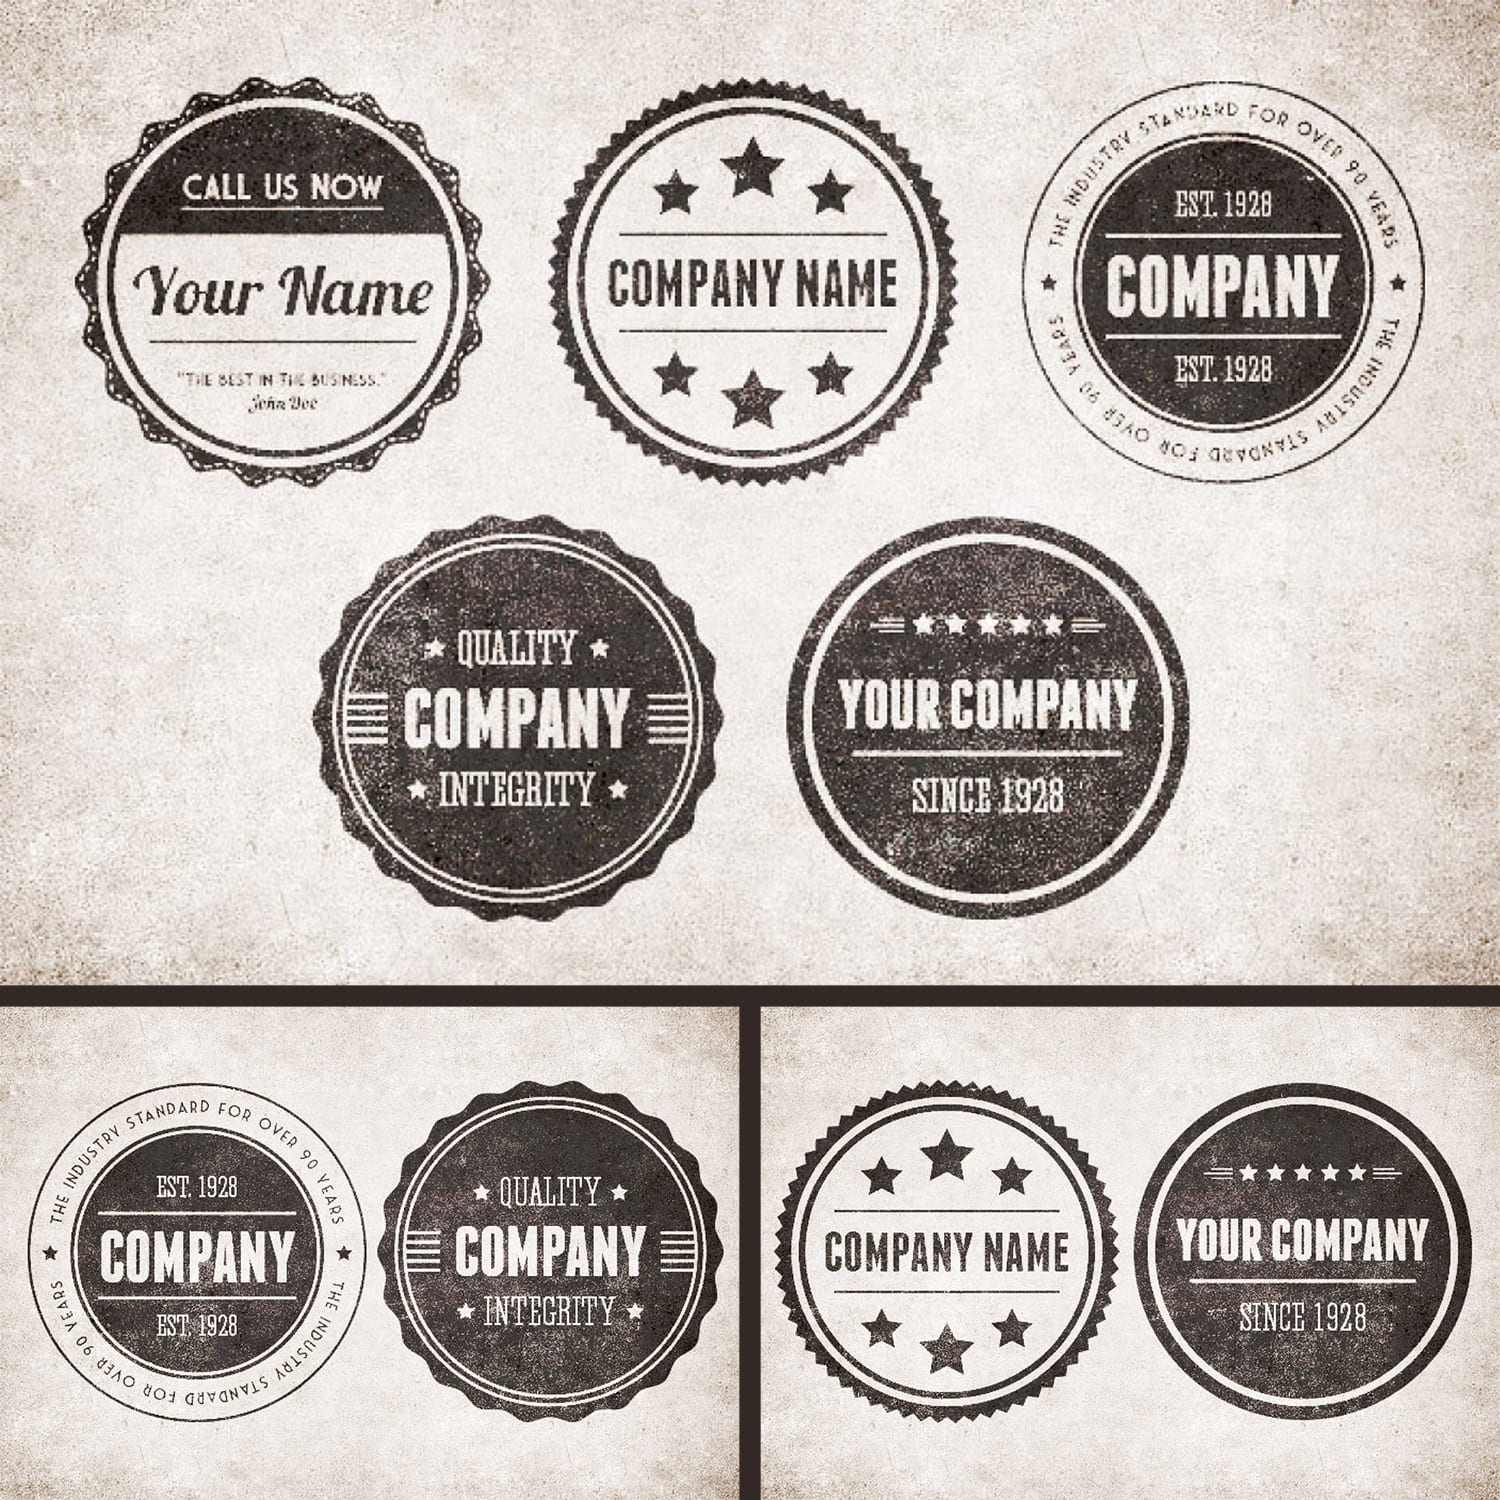 Vintage Circular Badges Vector Pack cover image.